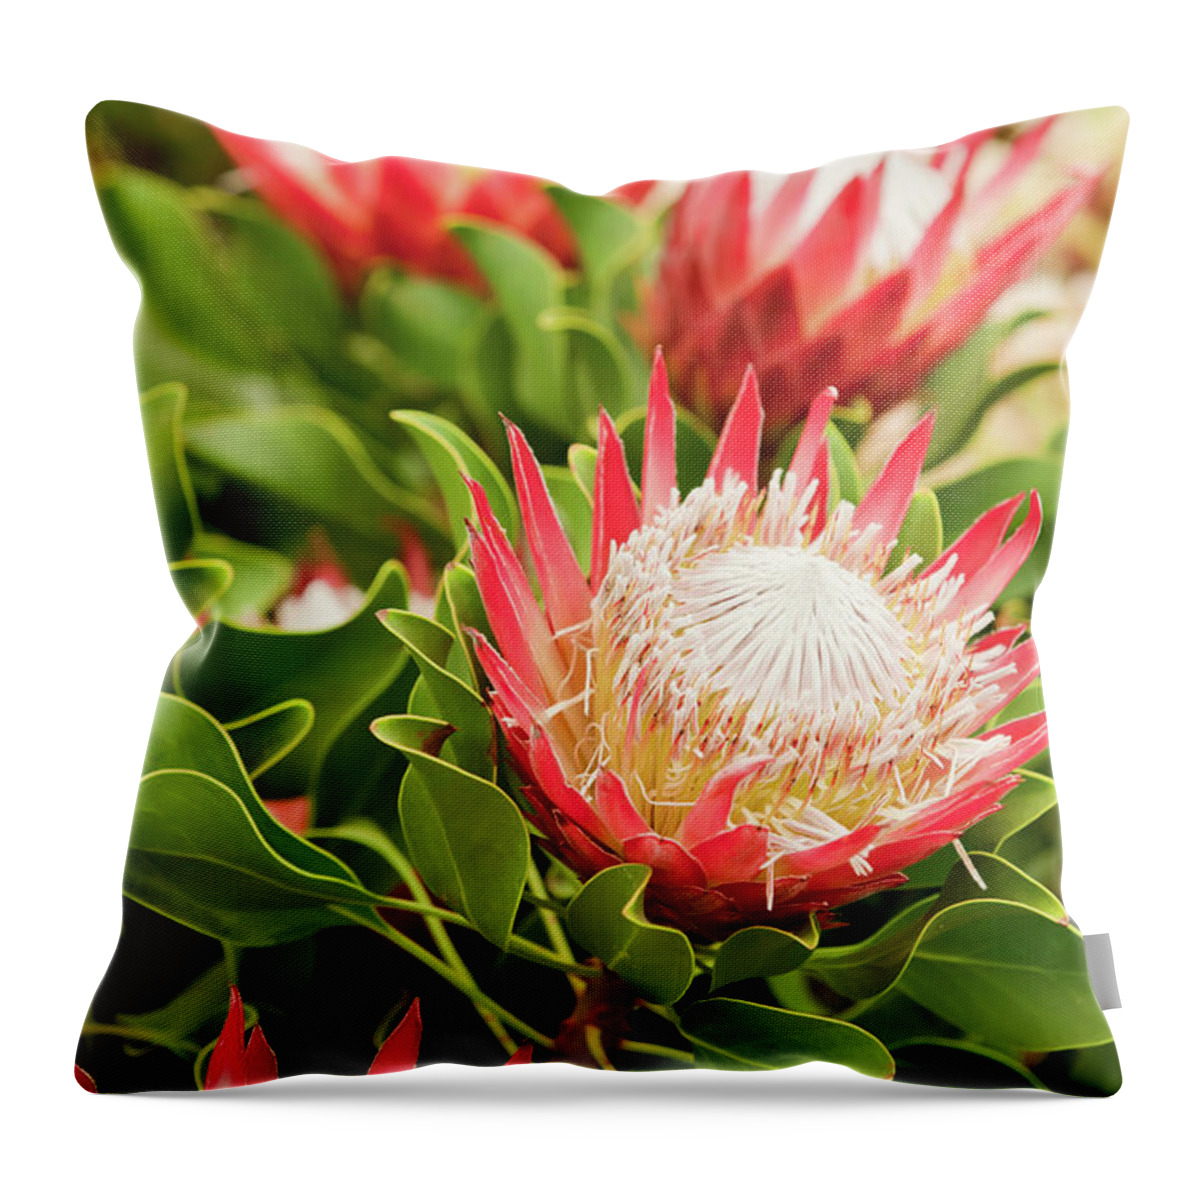 King Protea Throw Pillow featuring the photograph King Protea flowers by Simon Bratt